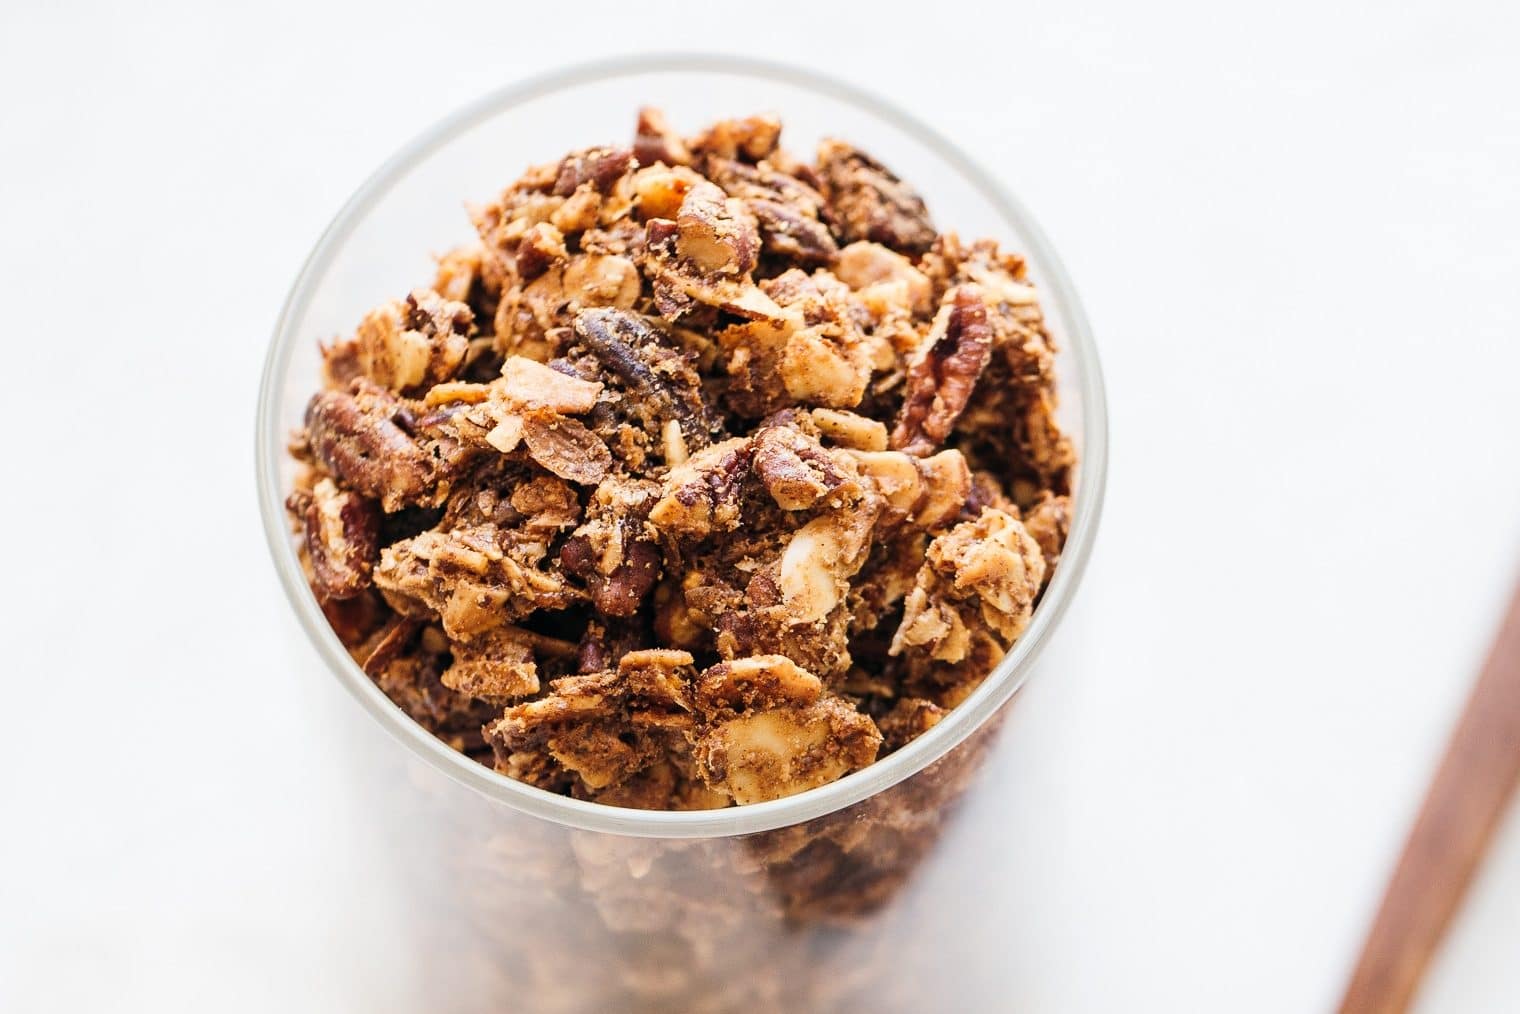 This 5-Ingredient Grain-Free Granola is the perfect simple granola recipe, minus the grains! It uses nuts and coconut in place of the oats to make a filling and delicious vegan & paleo granola.